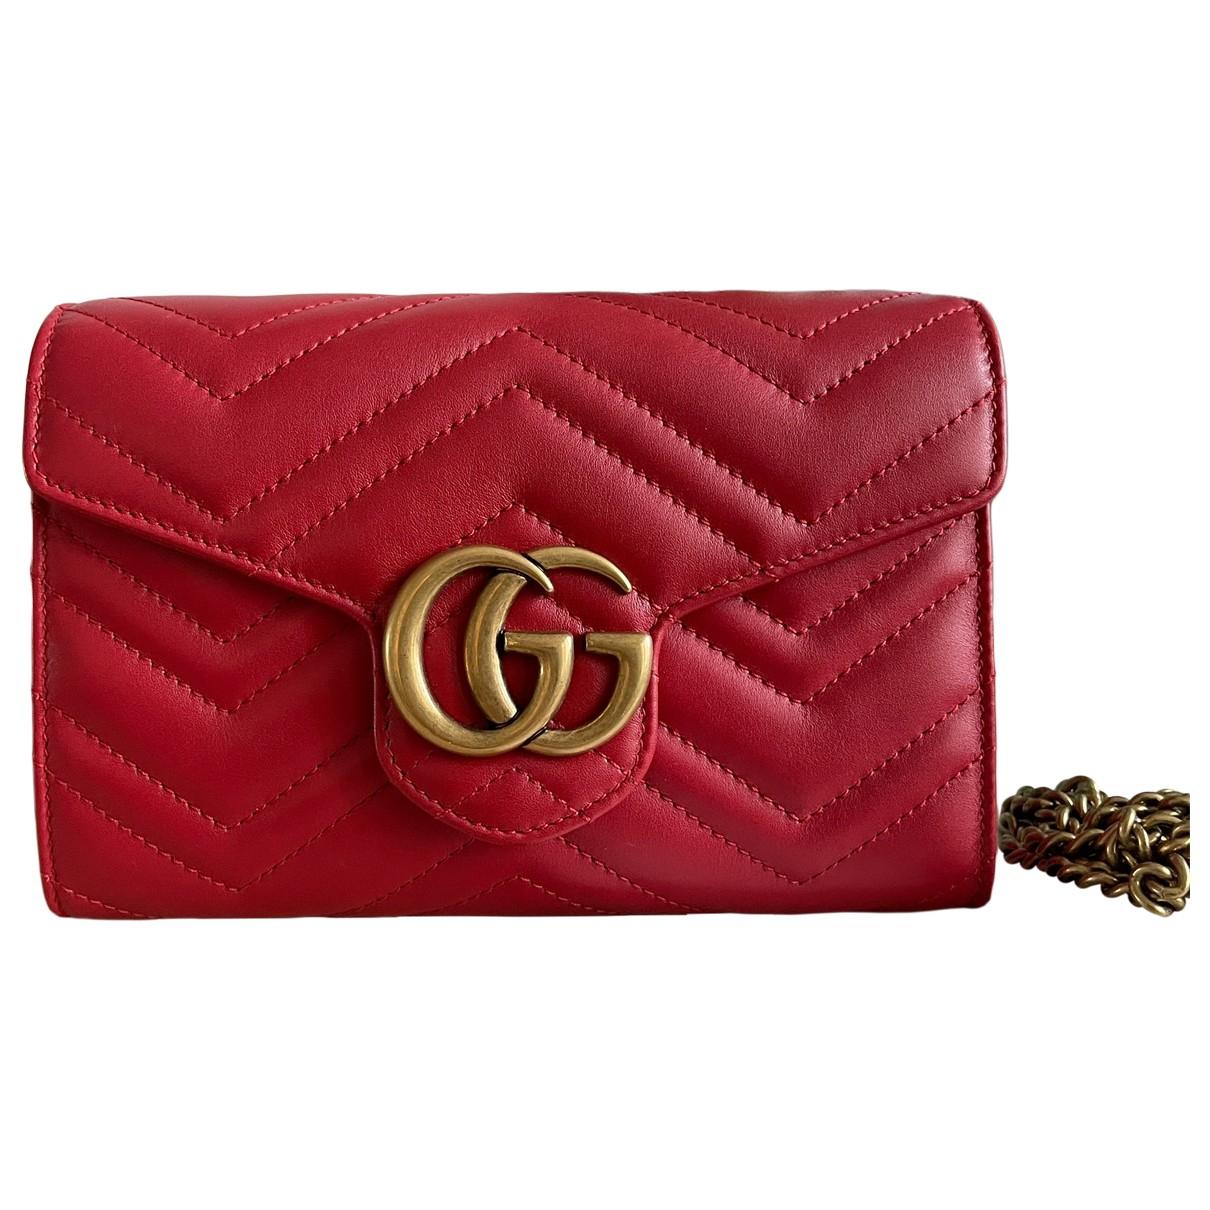 marmont chain bag leather red ghw – L'UXE LINK